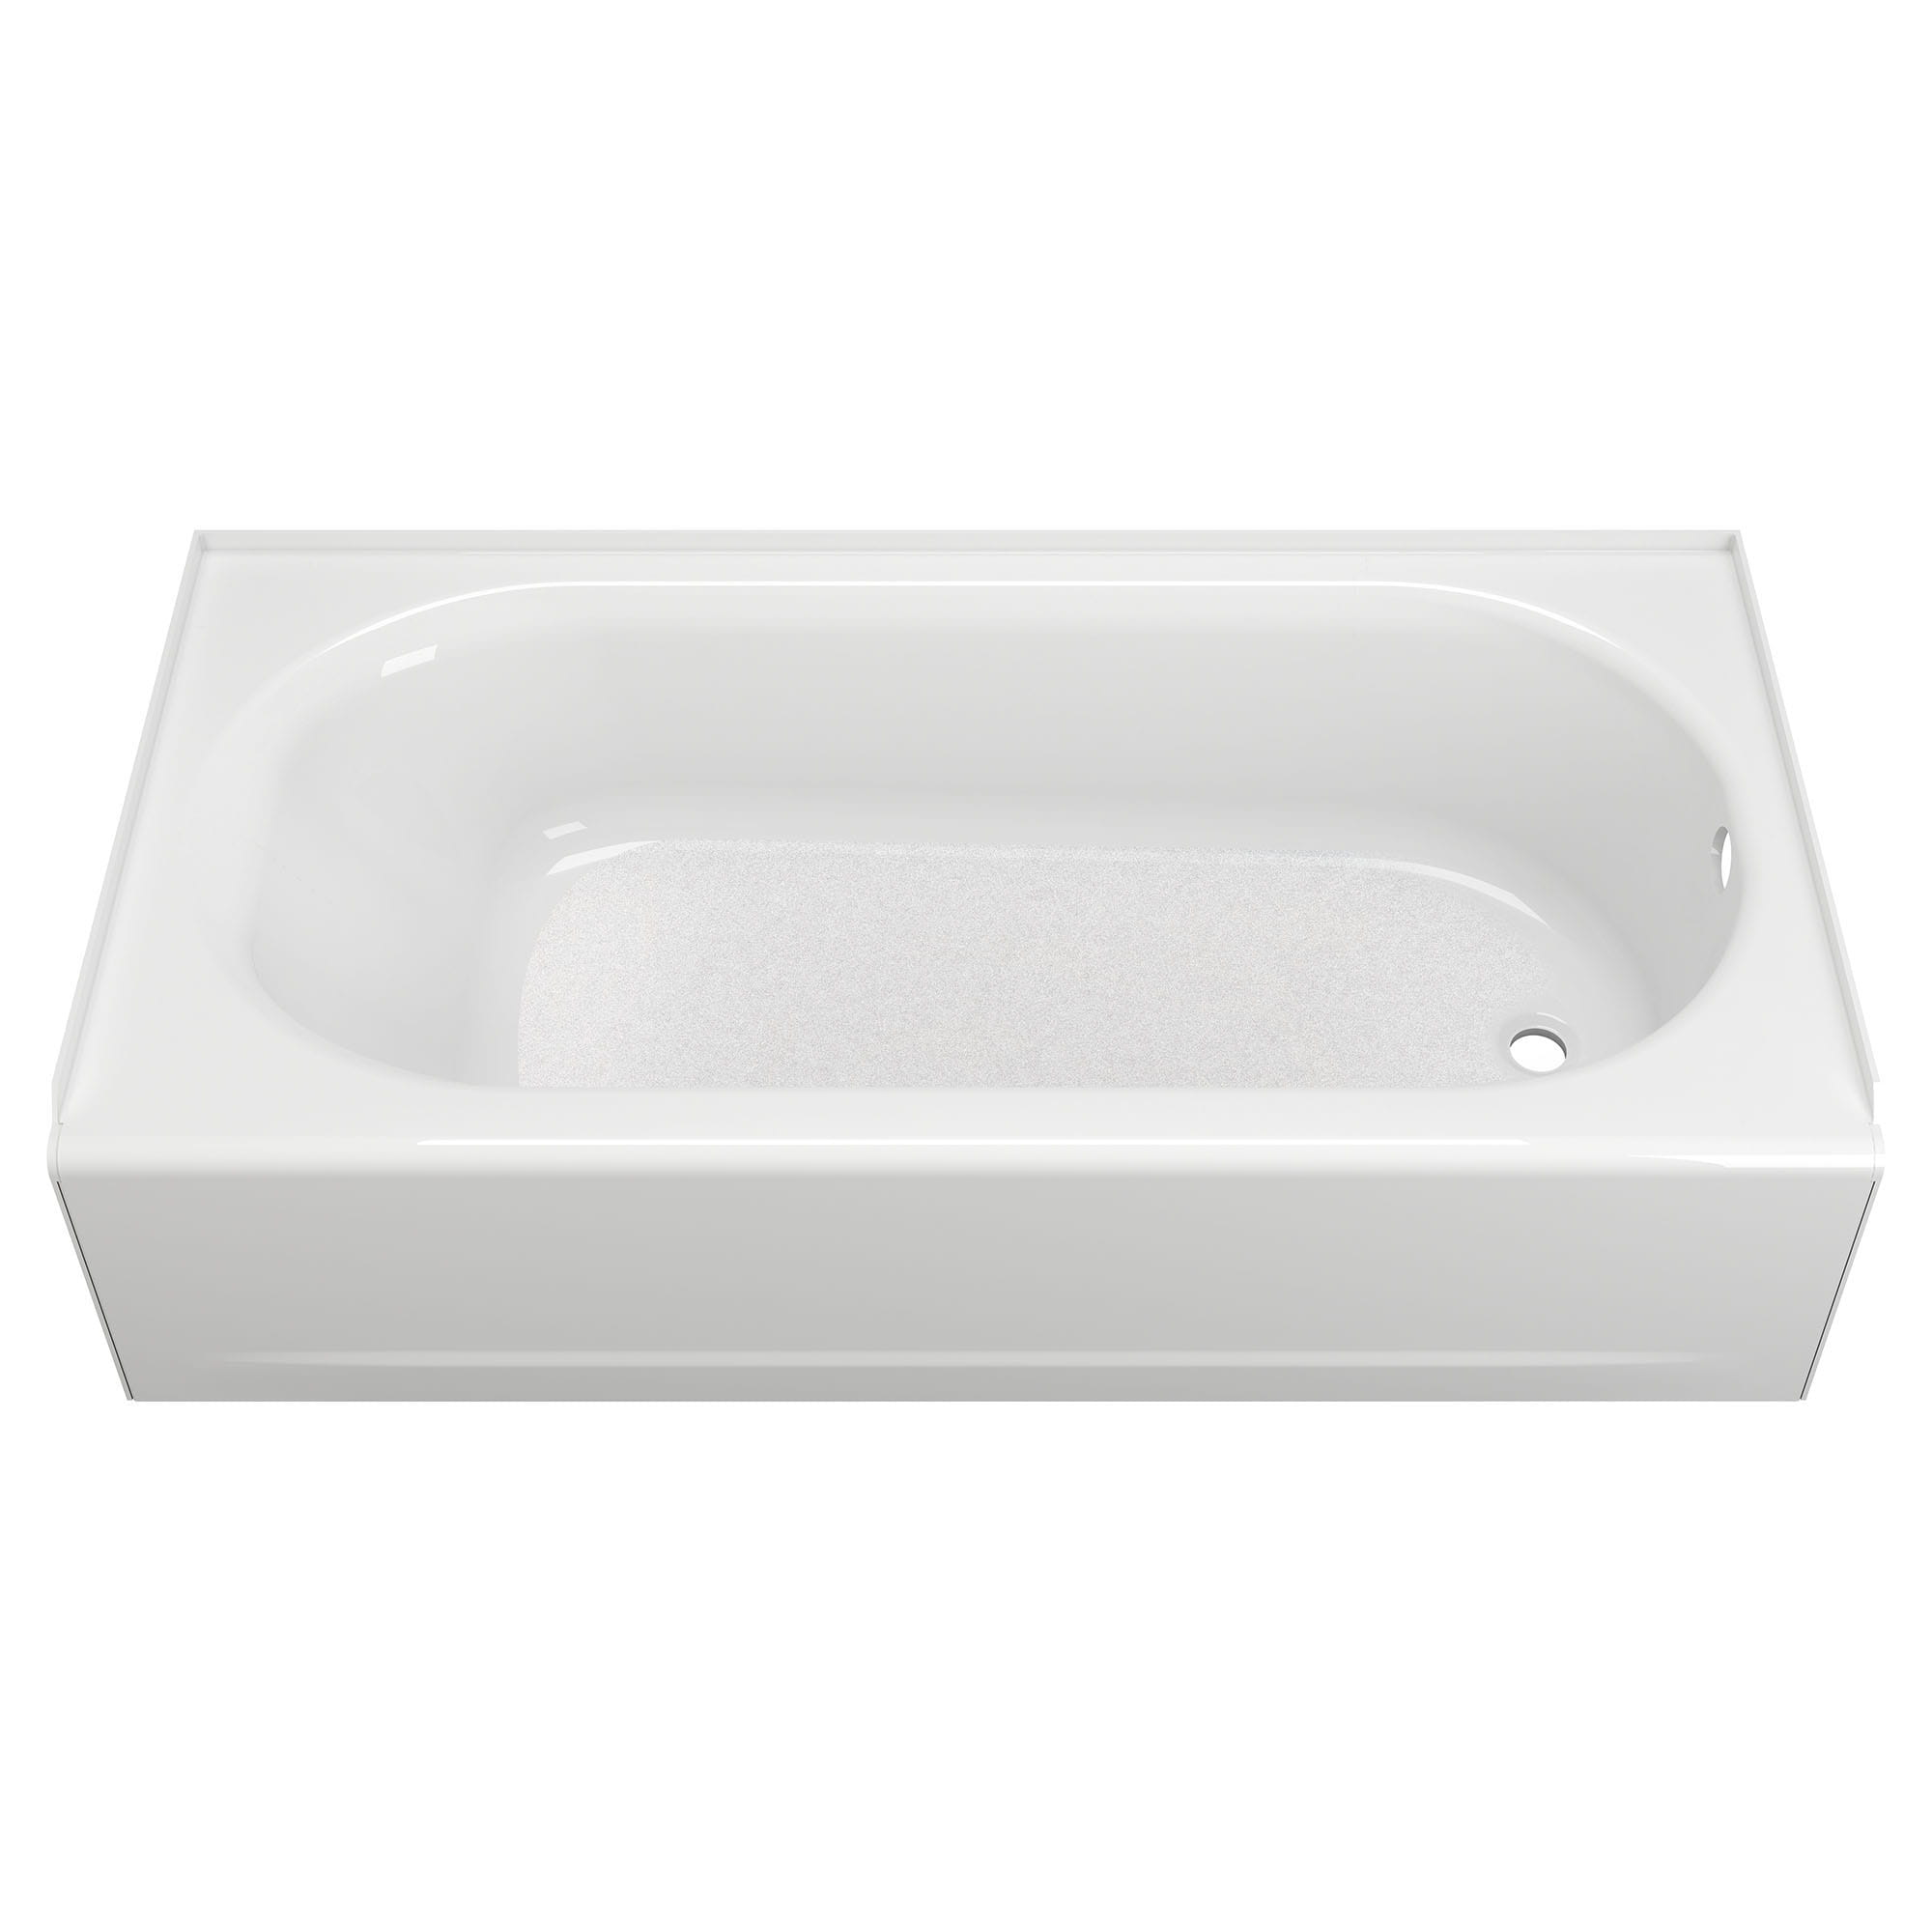 Princeton Americast 60 x 30 Inch Integral Apron Bathtub with Right Hand Outlet WHITE